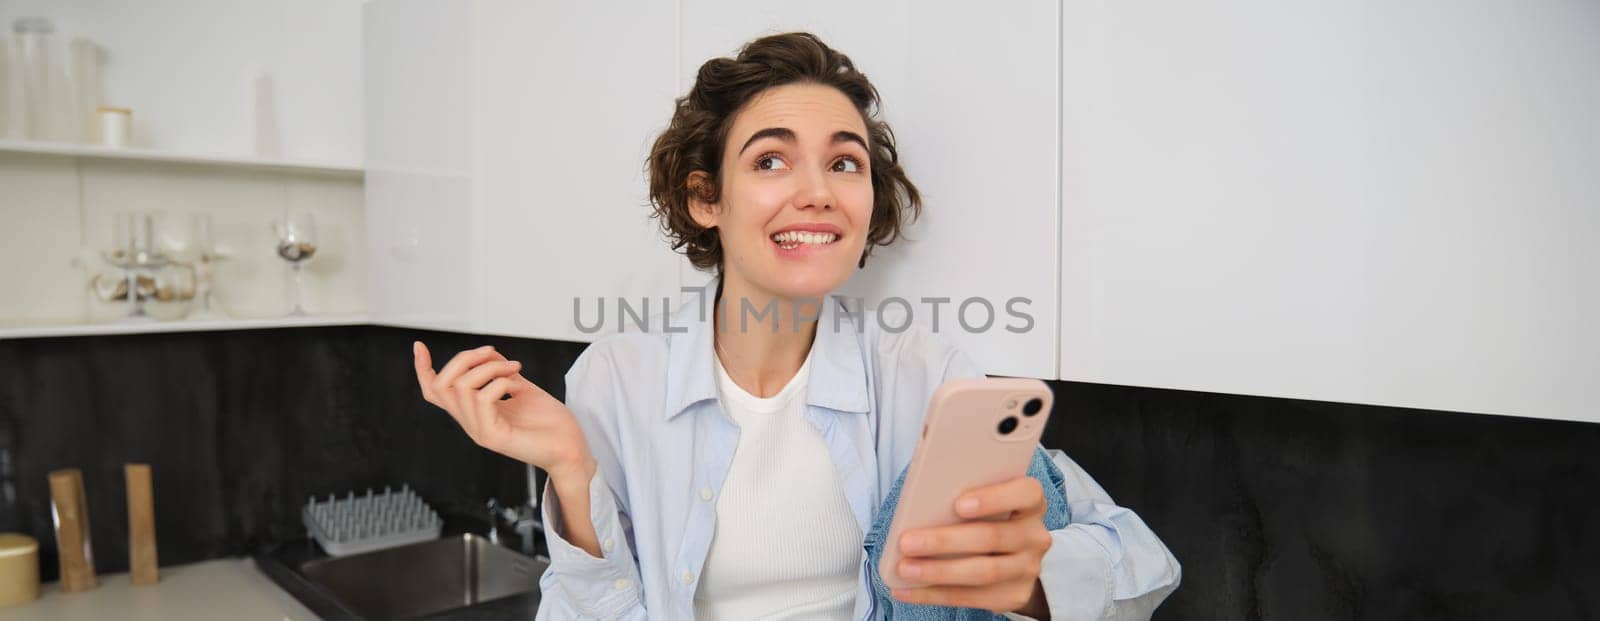 Enthusiastic girl in kitchen, holds smartphone looks excited, smiles and bites lip, tempted to try smth, talks on mobile phone.